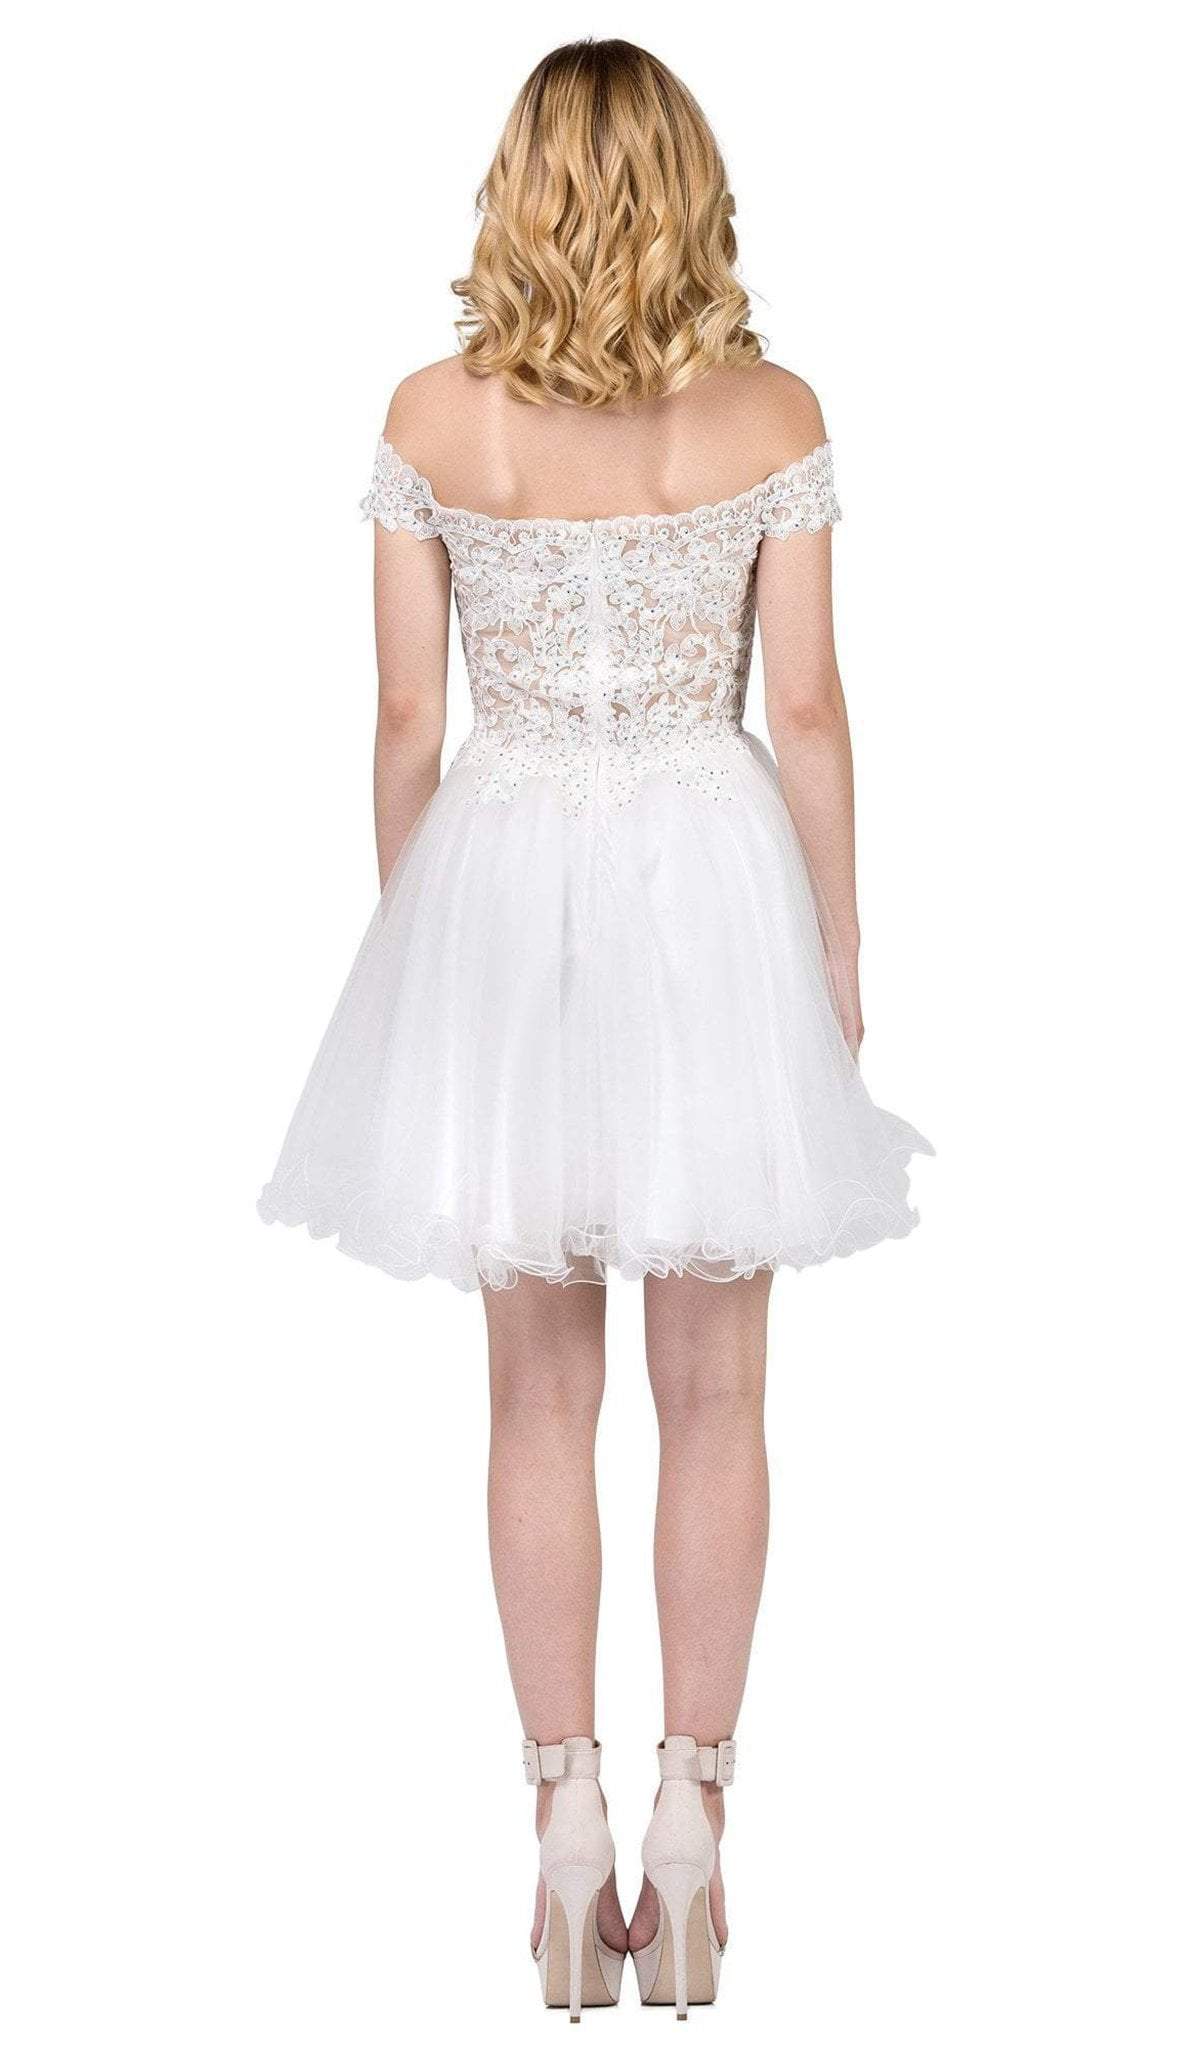 Dancing Queen - 3018 Embellished Off-Shoulder A-line Homecoming Dress In White